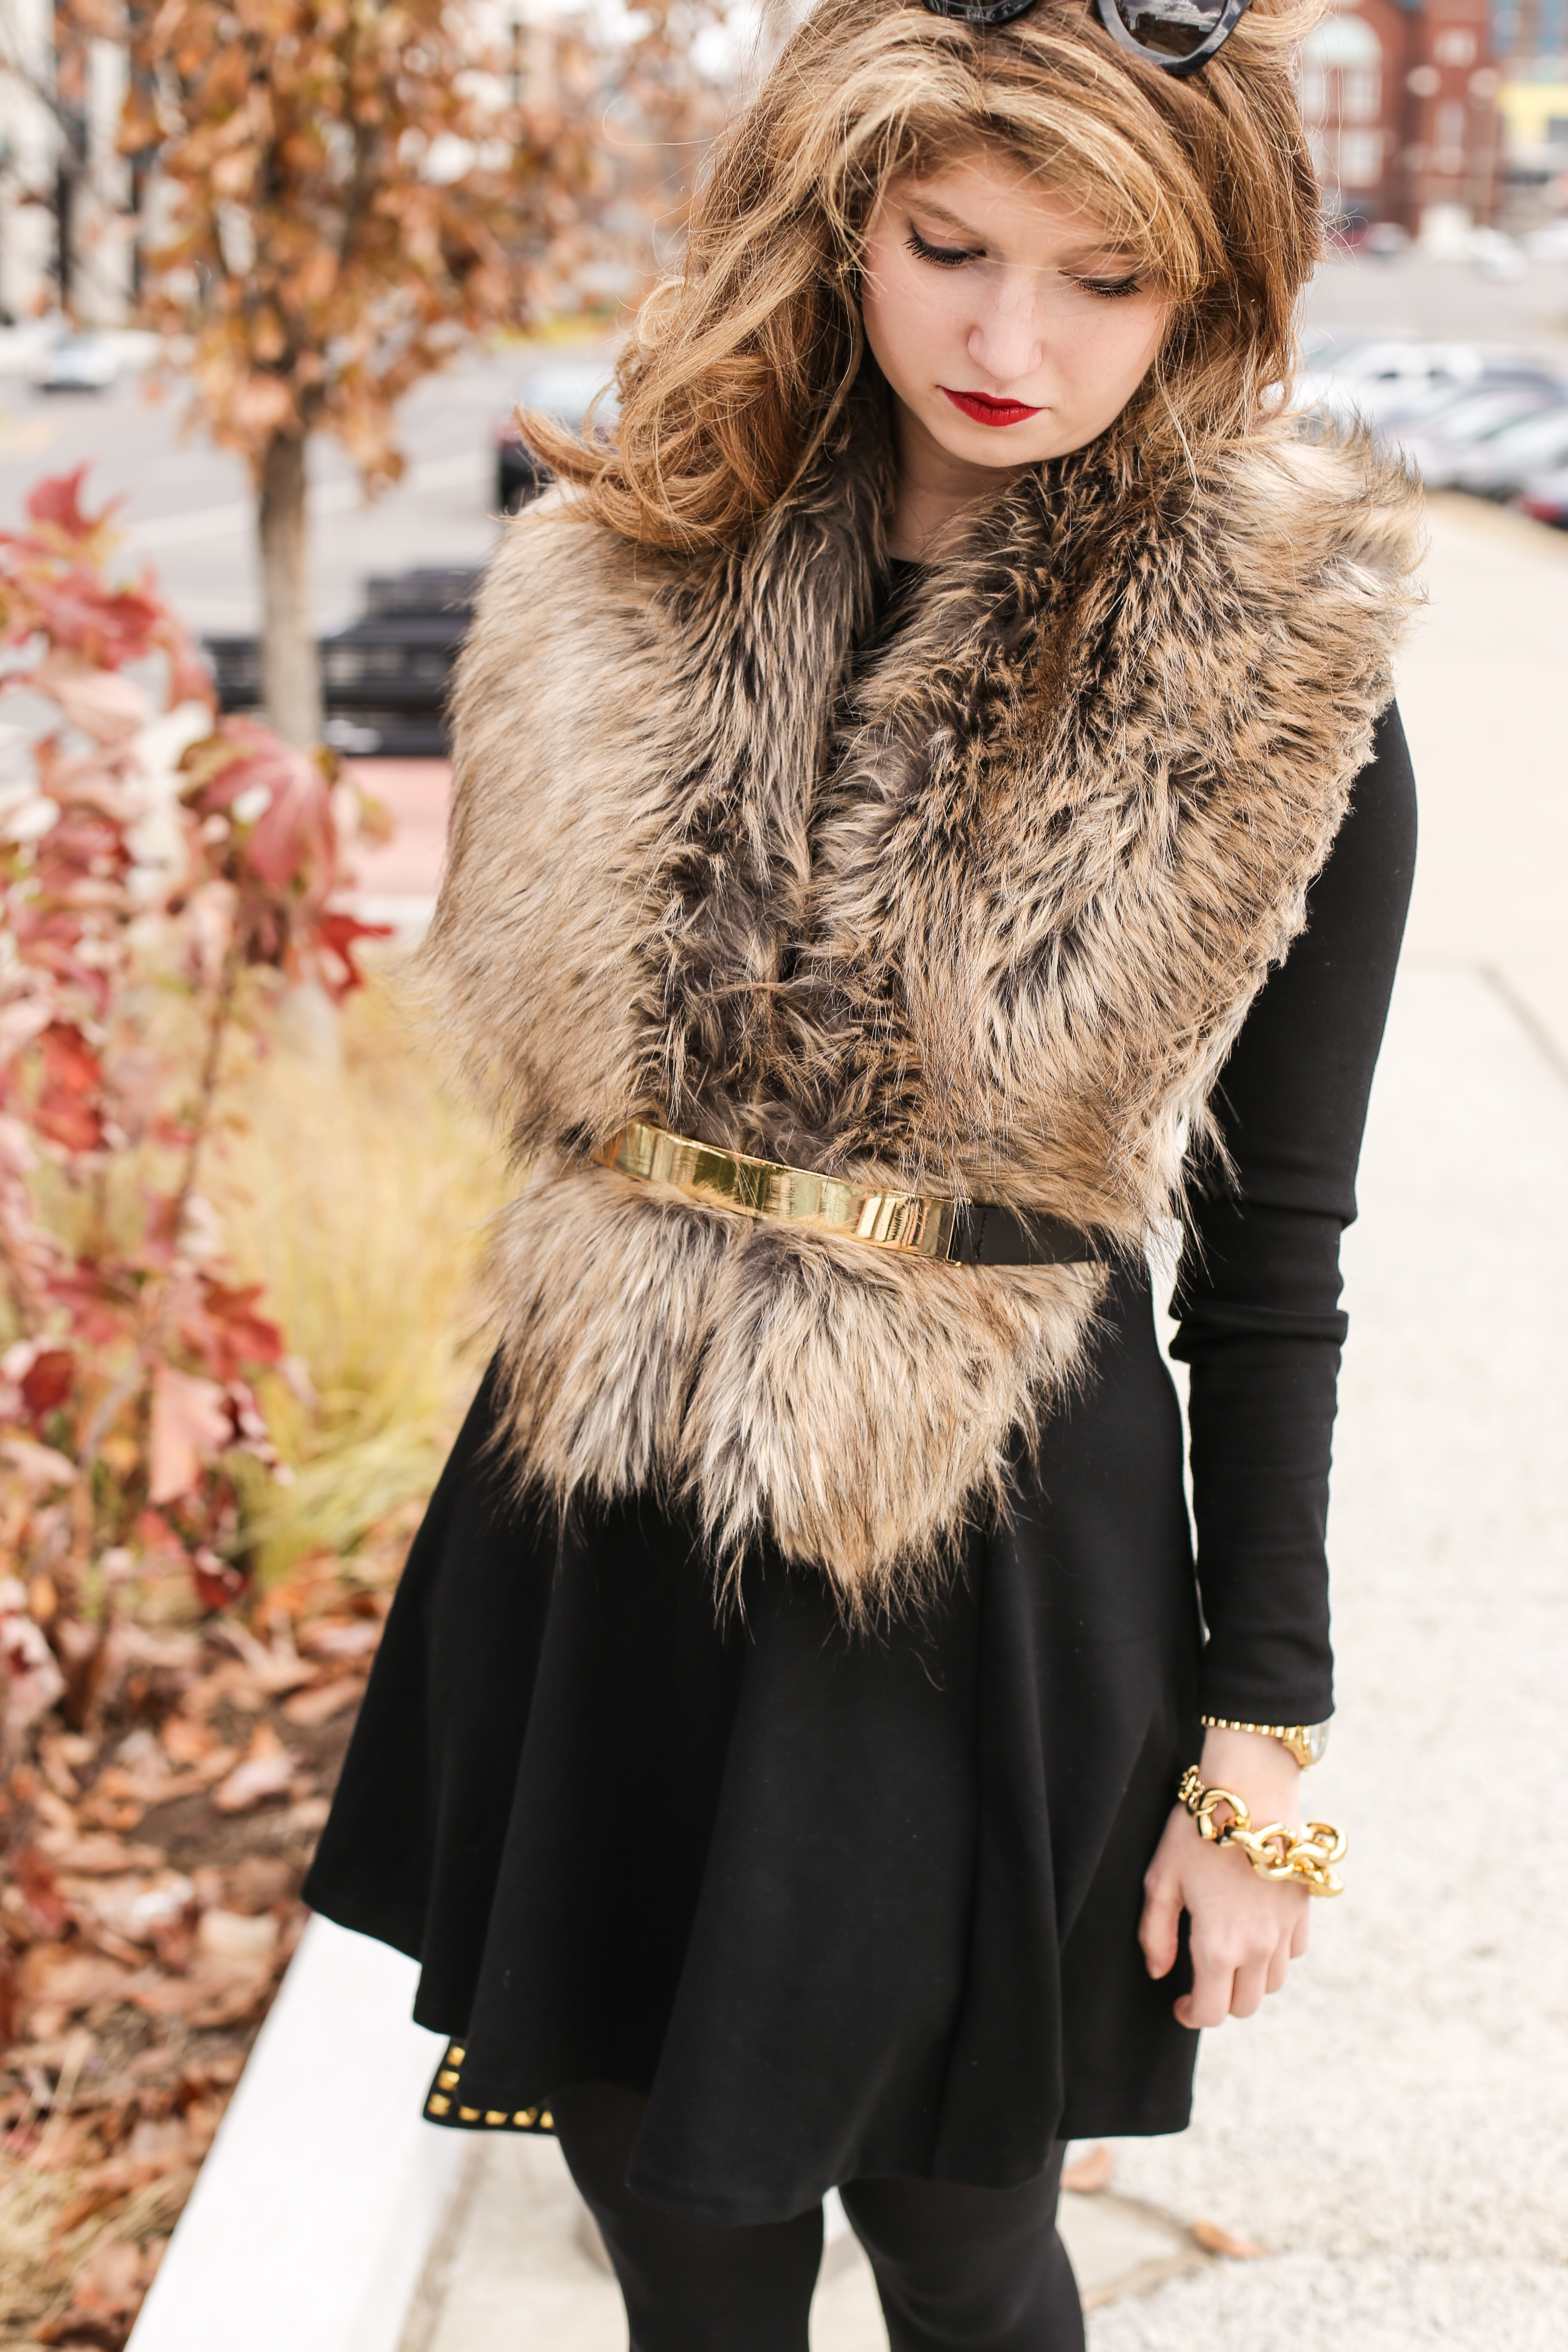 10 Glamorous Office Outfit Ideas with a Faux Fur Scarf